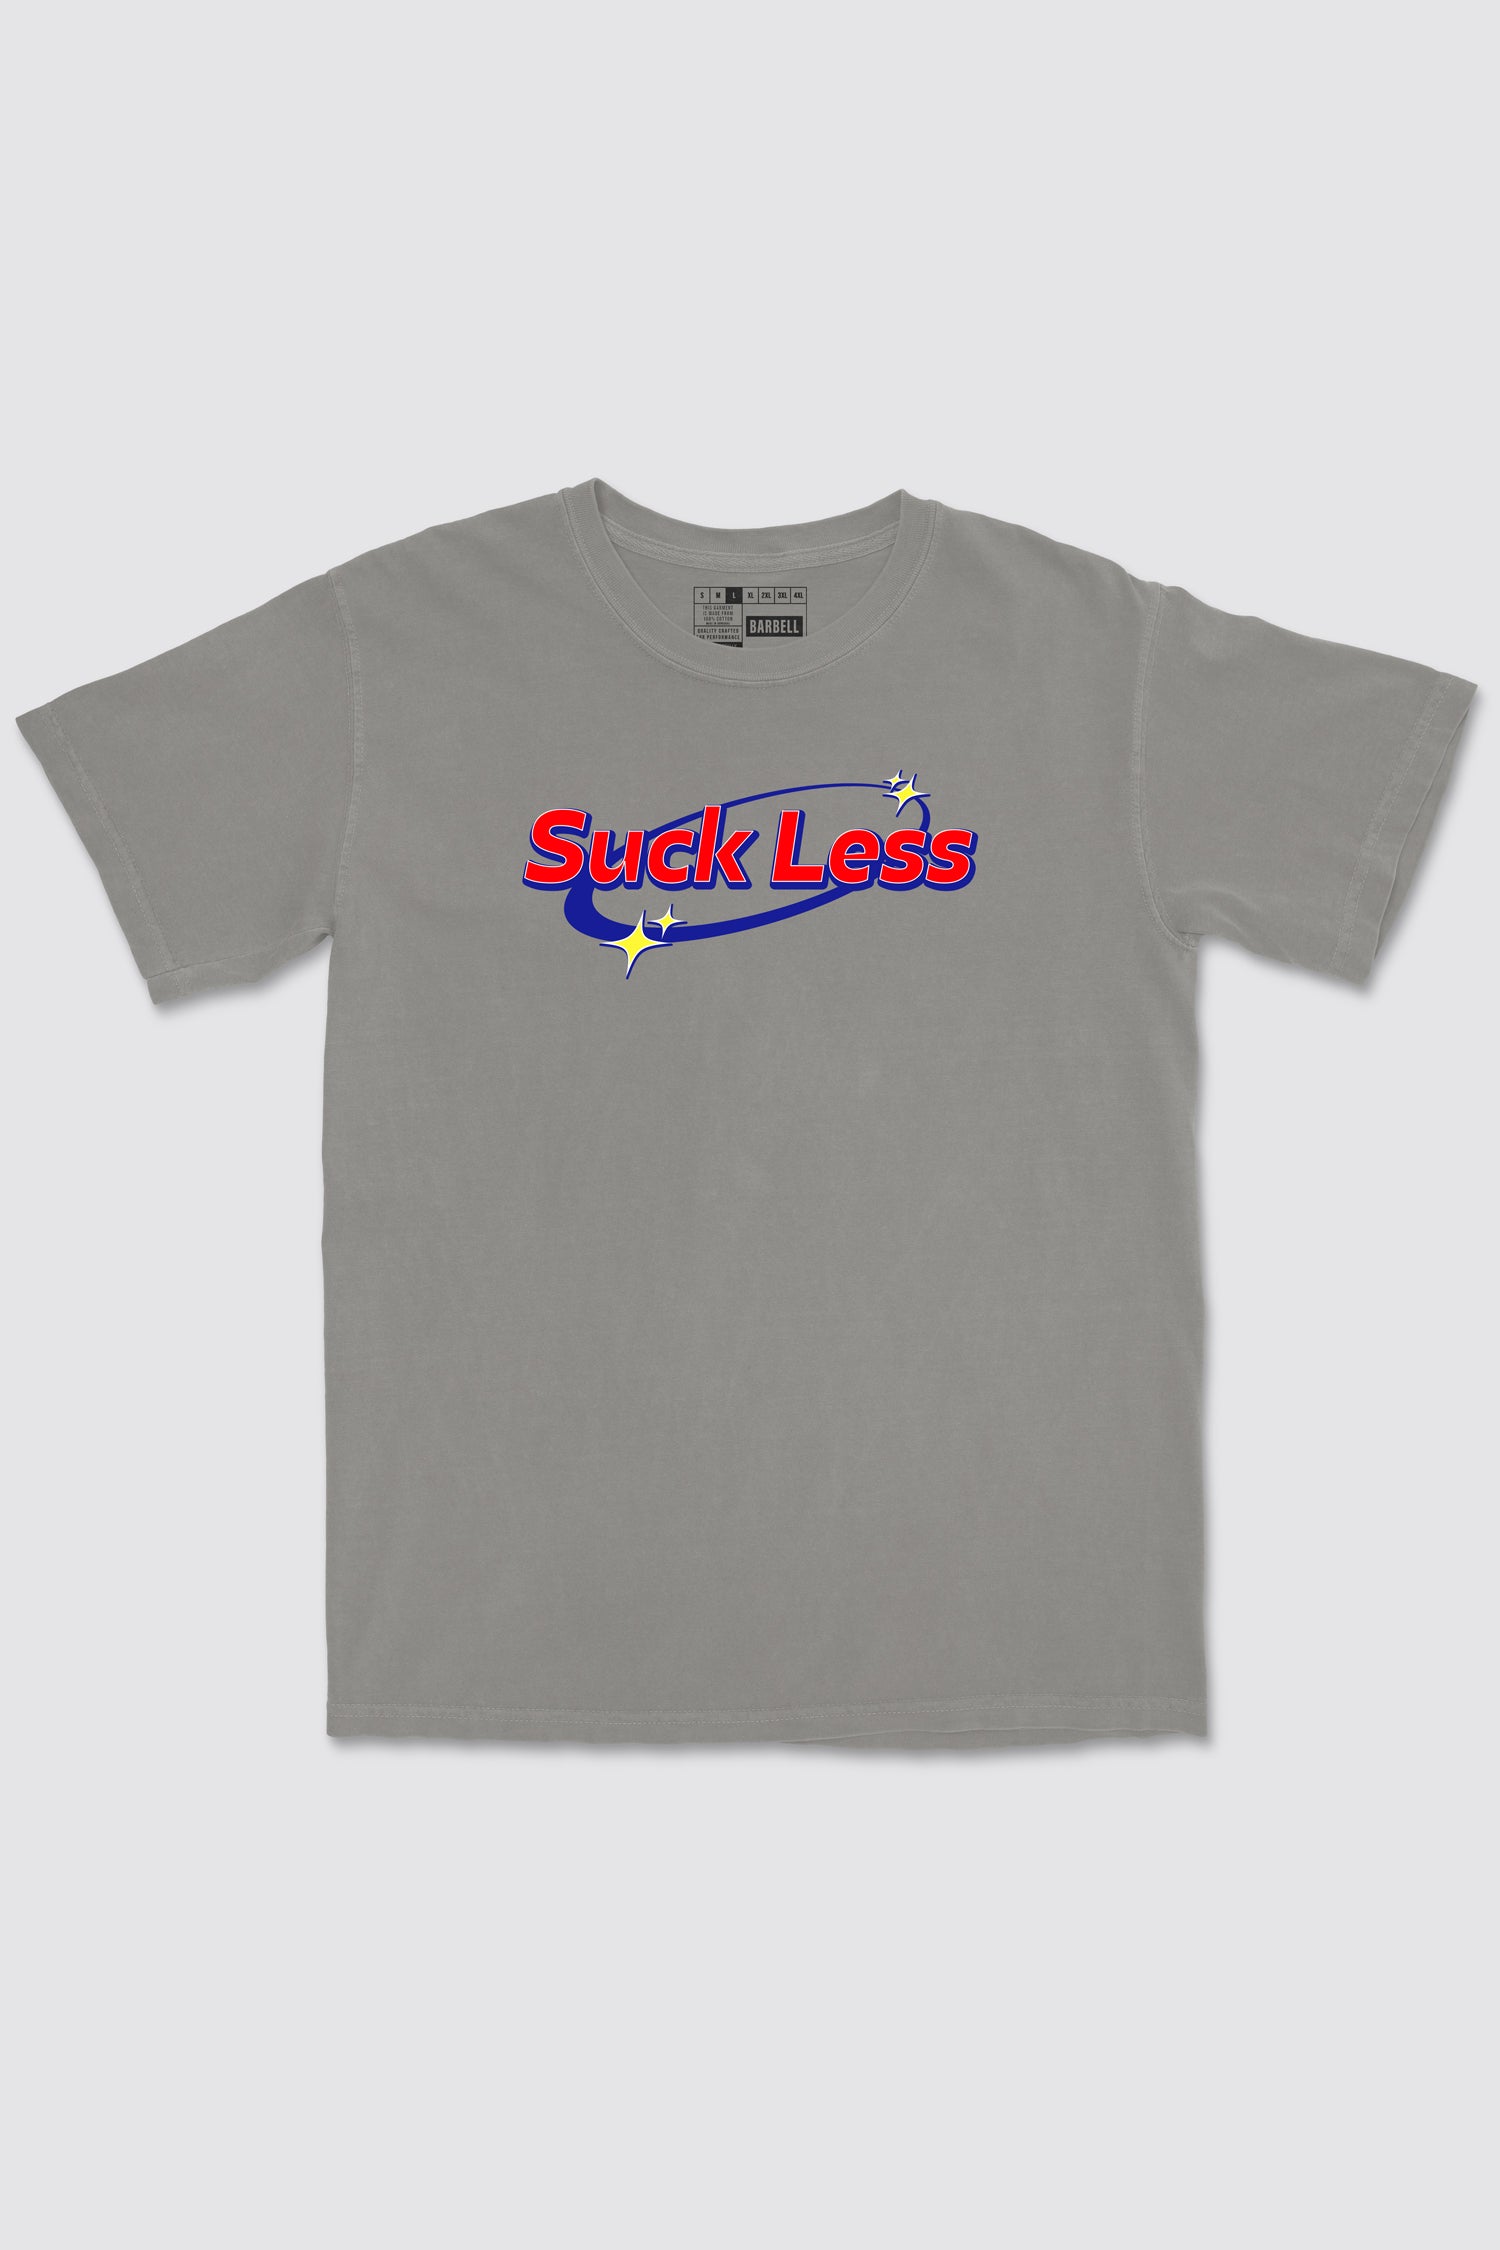 why we made the Nate Cerwinske Suck Less Tee